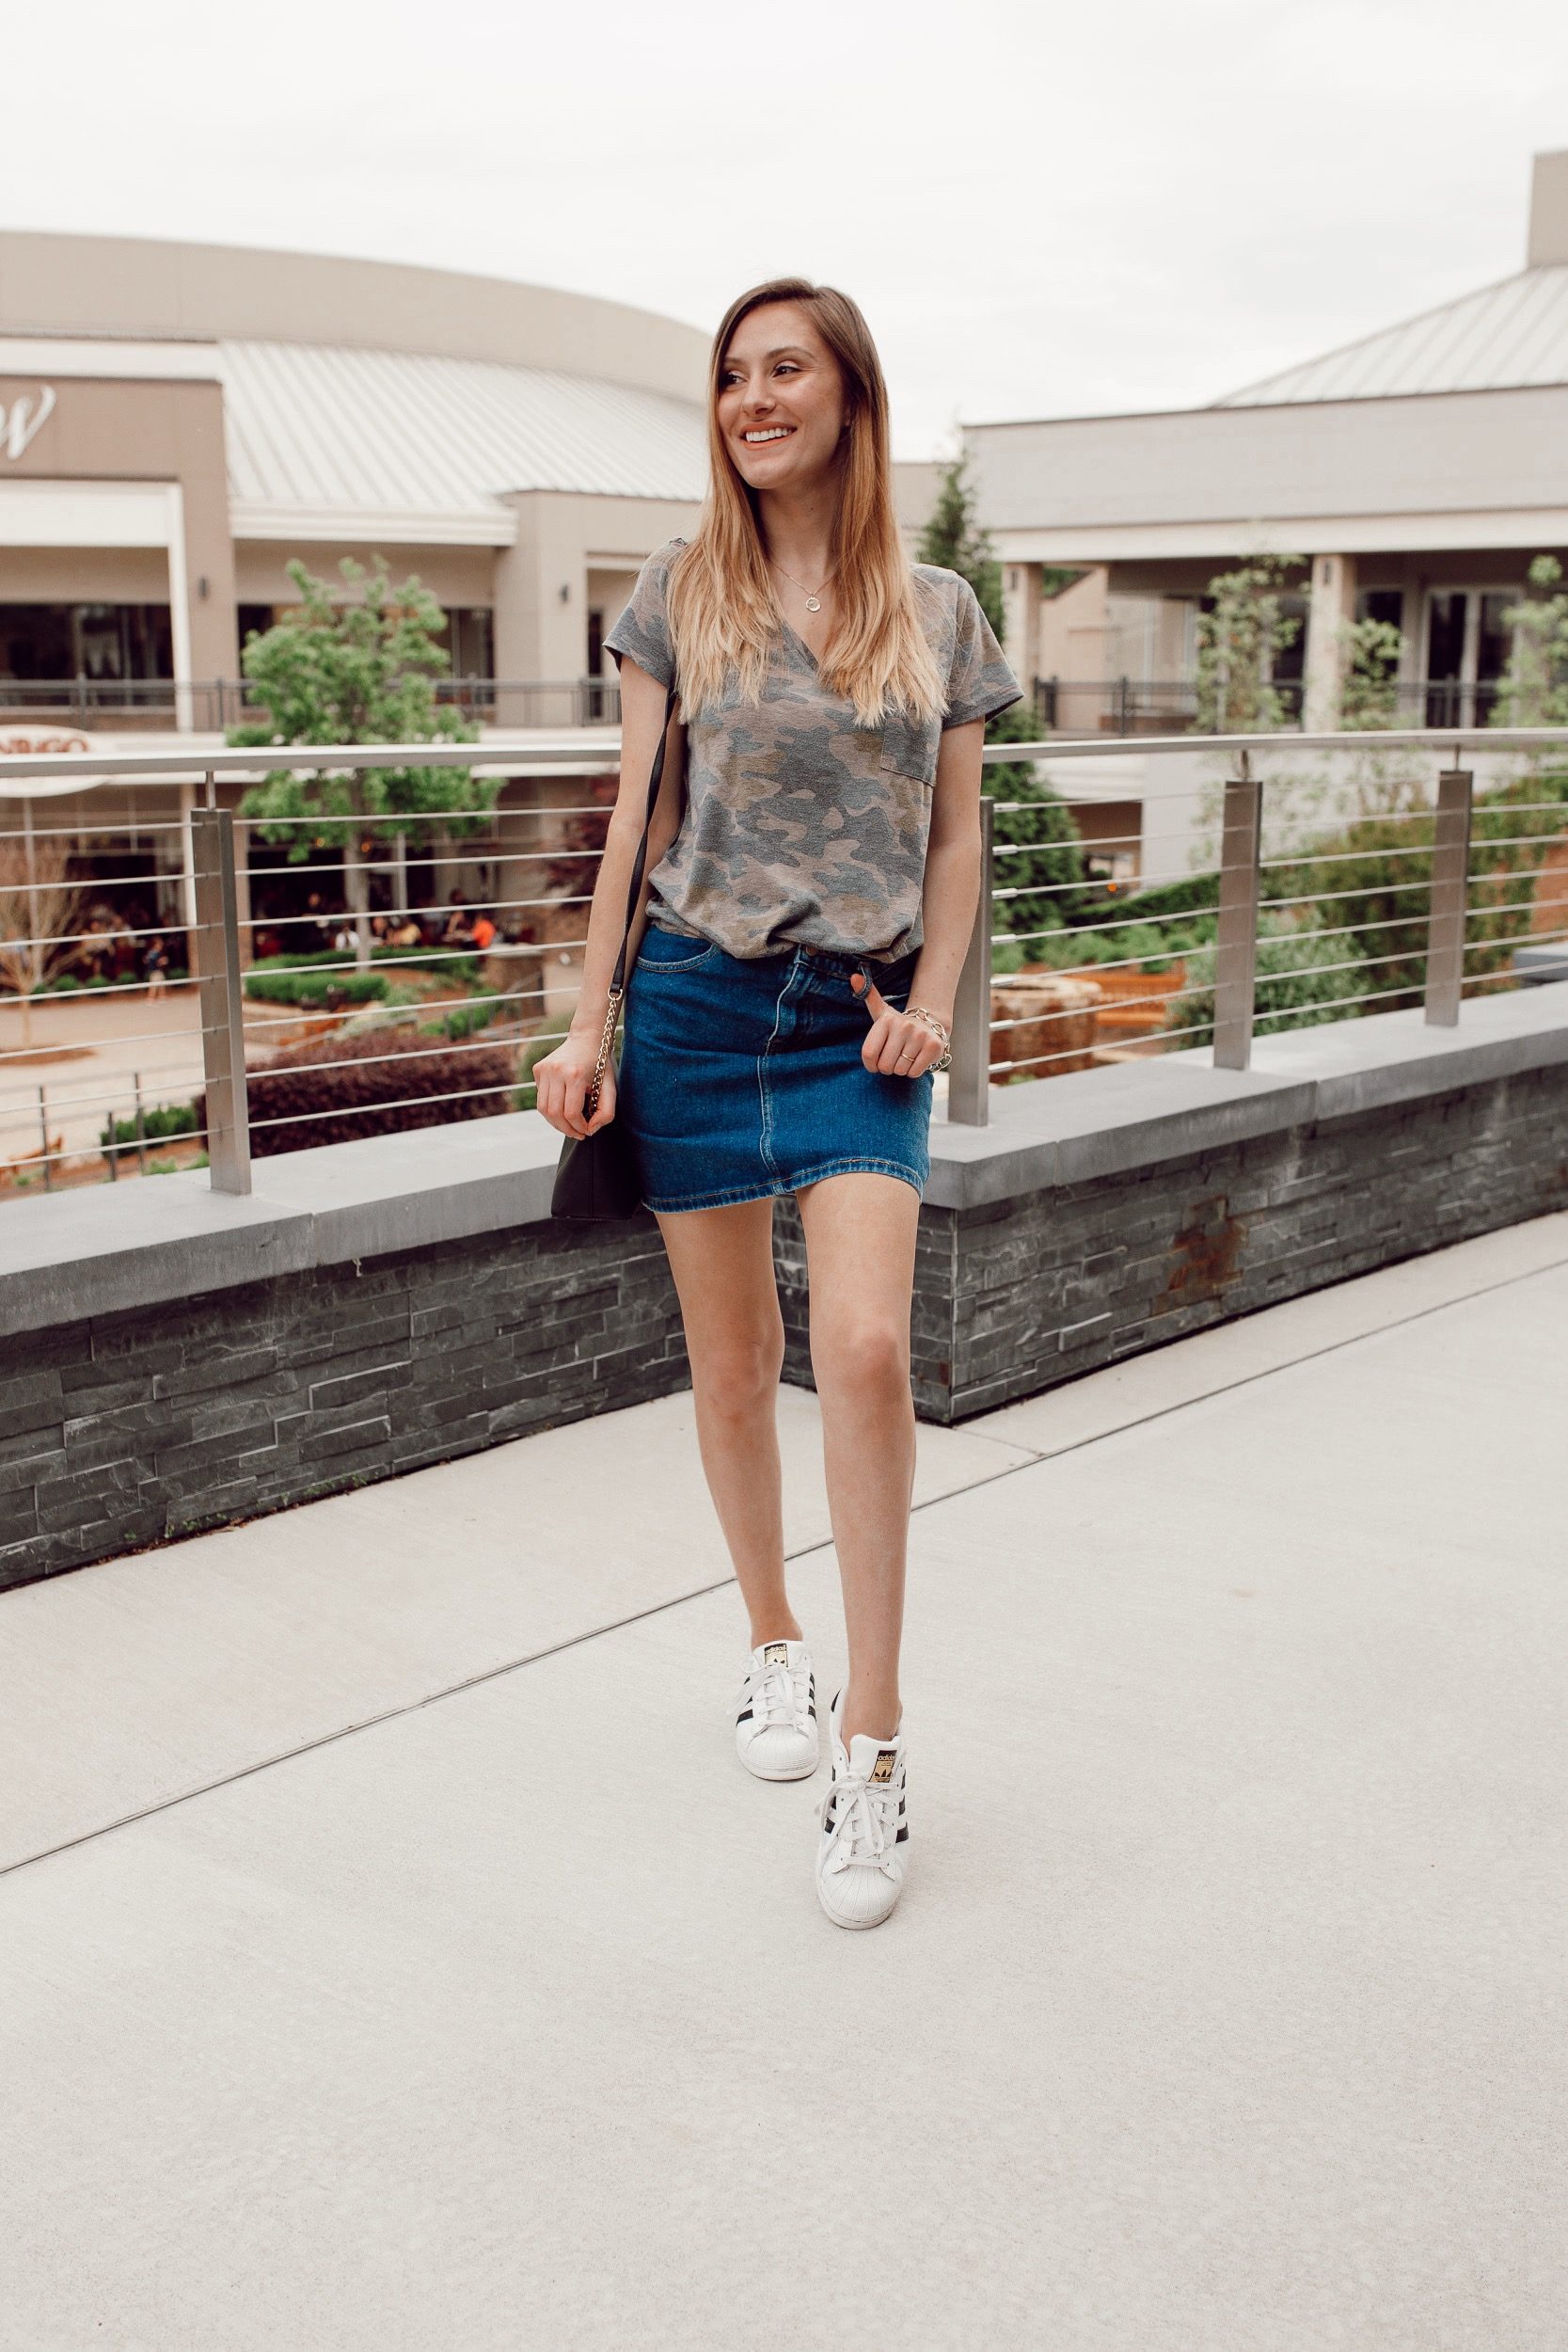 Sporty outfit inspiration with fashion blogger Jessica Linn wearing a Forever21 Denim skirt, Adidas shoes, and a camouflage t-shirt.